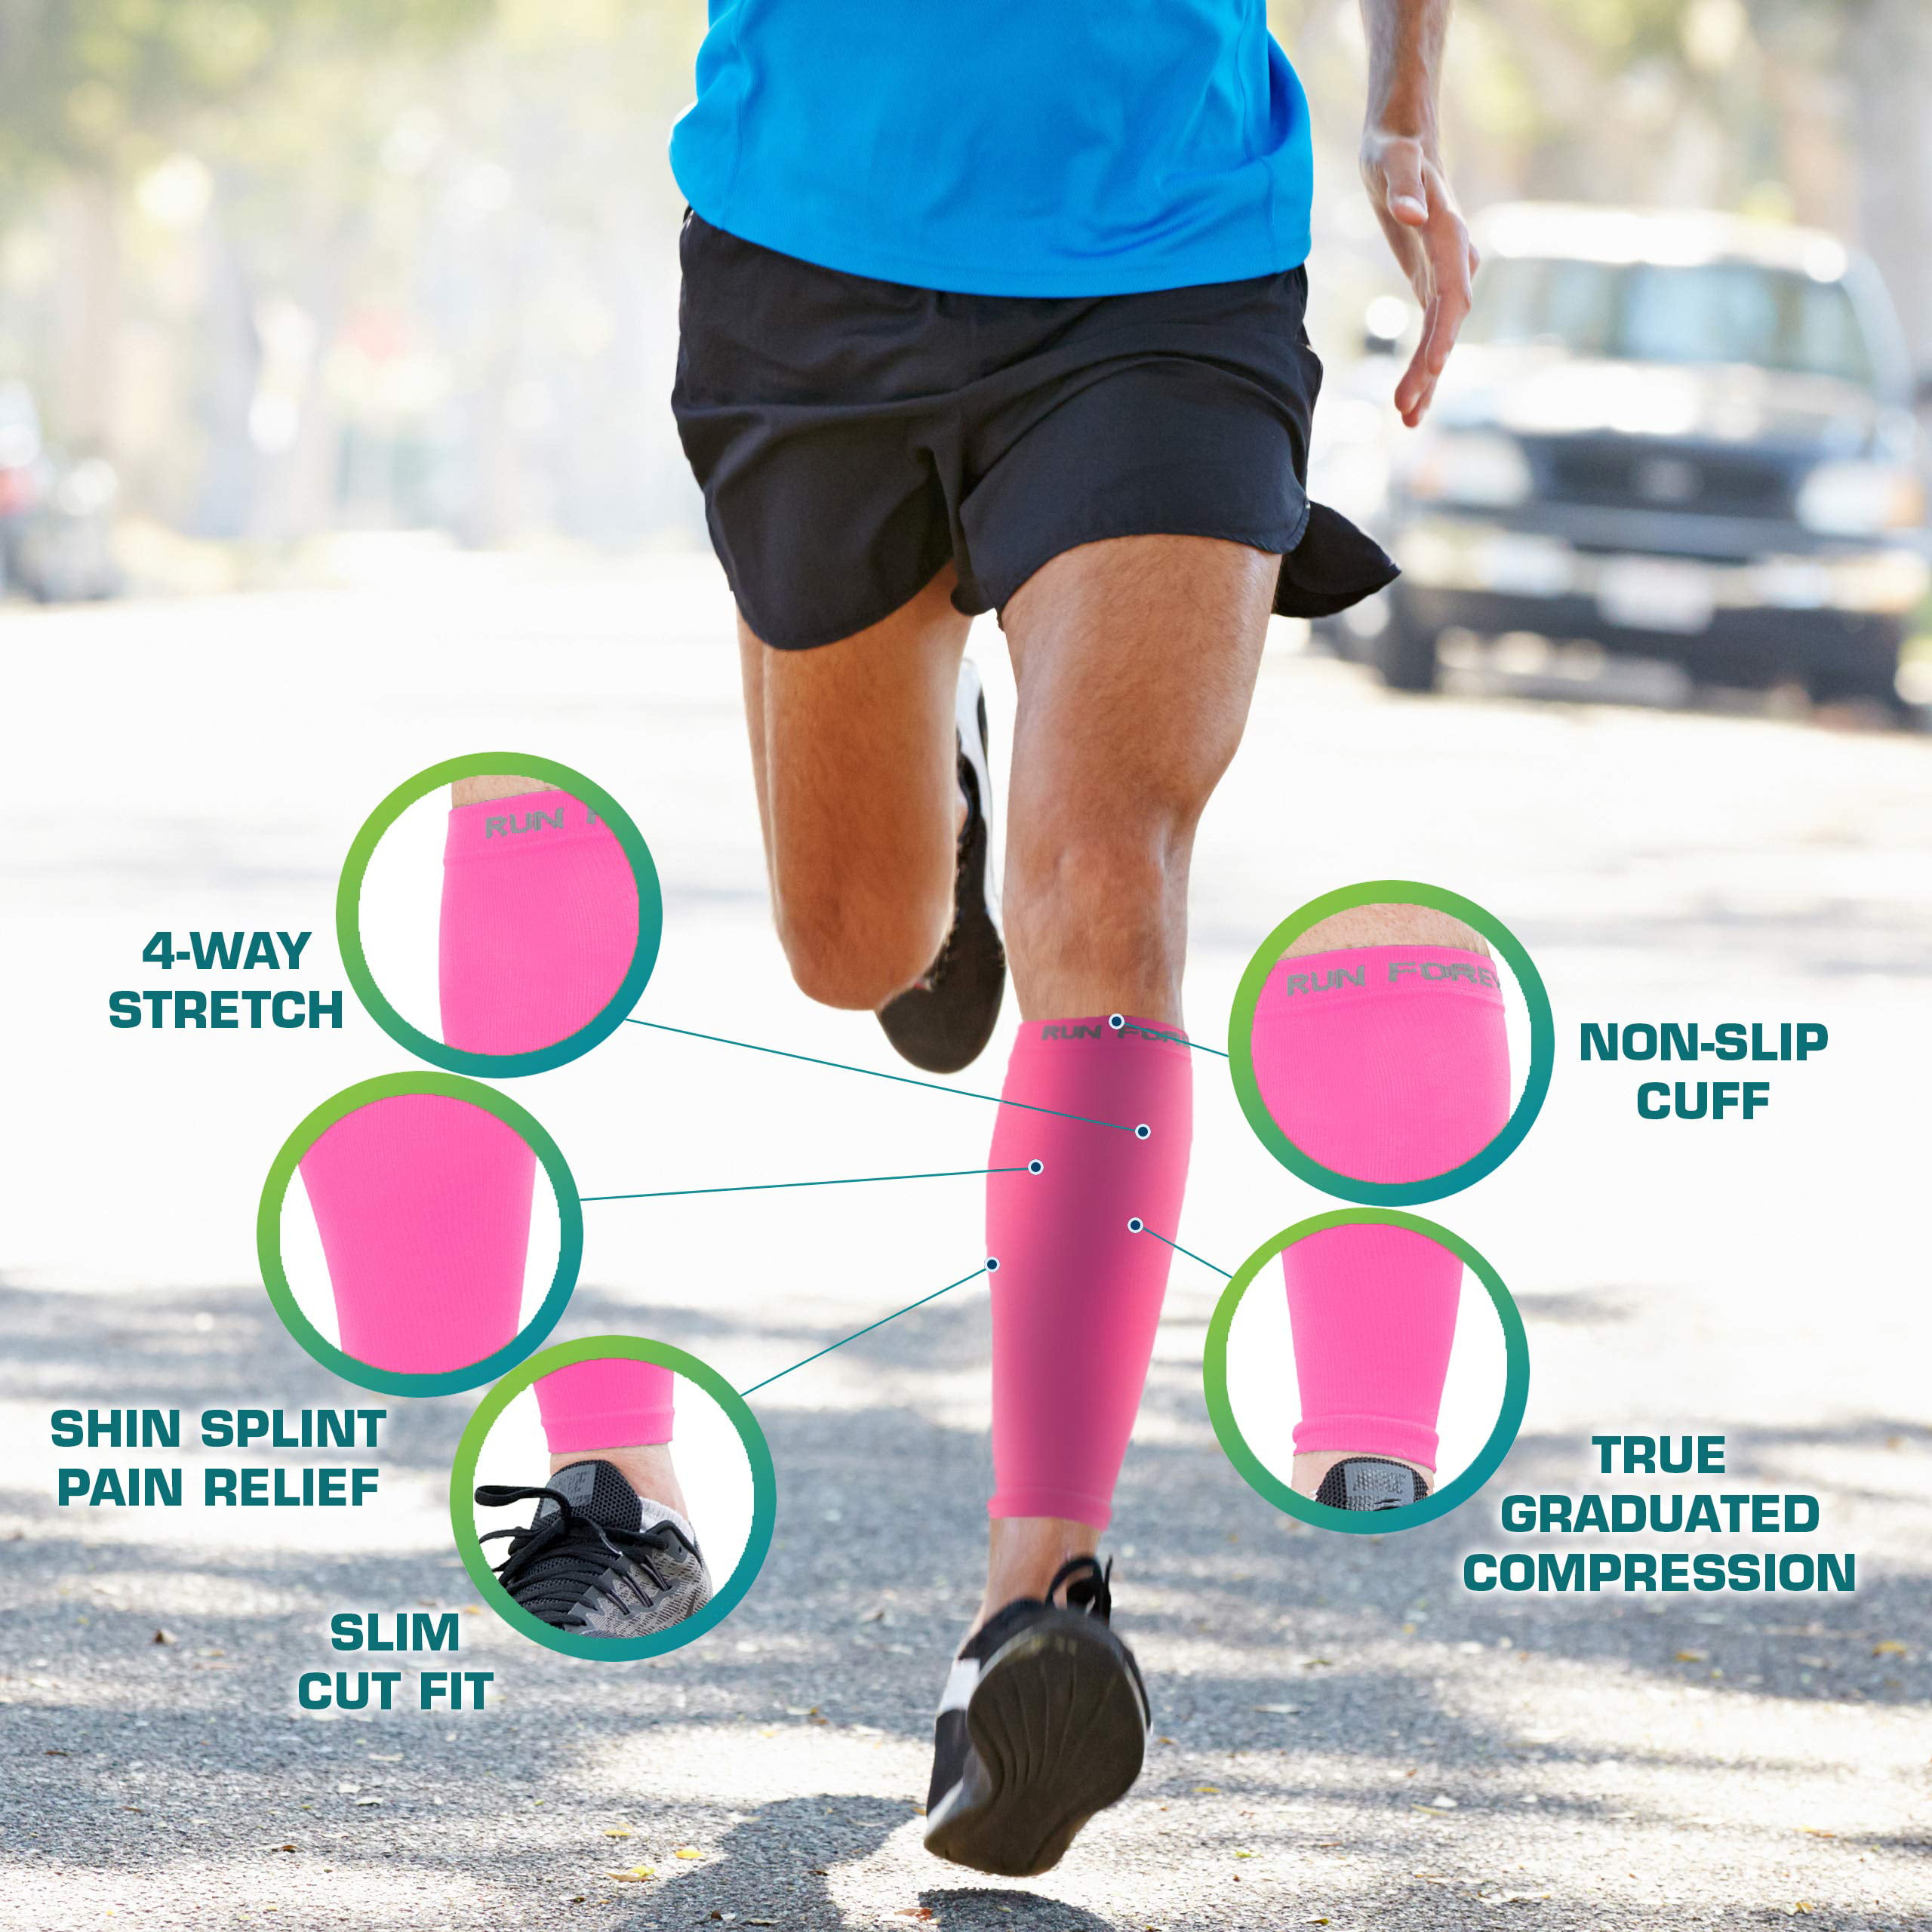 Female Runner Pink Compression Calf Sleeves Stock Photo 1038852694